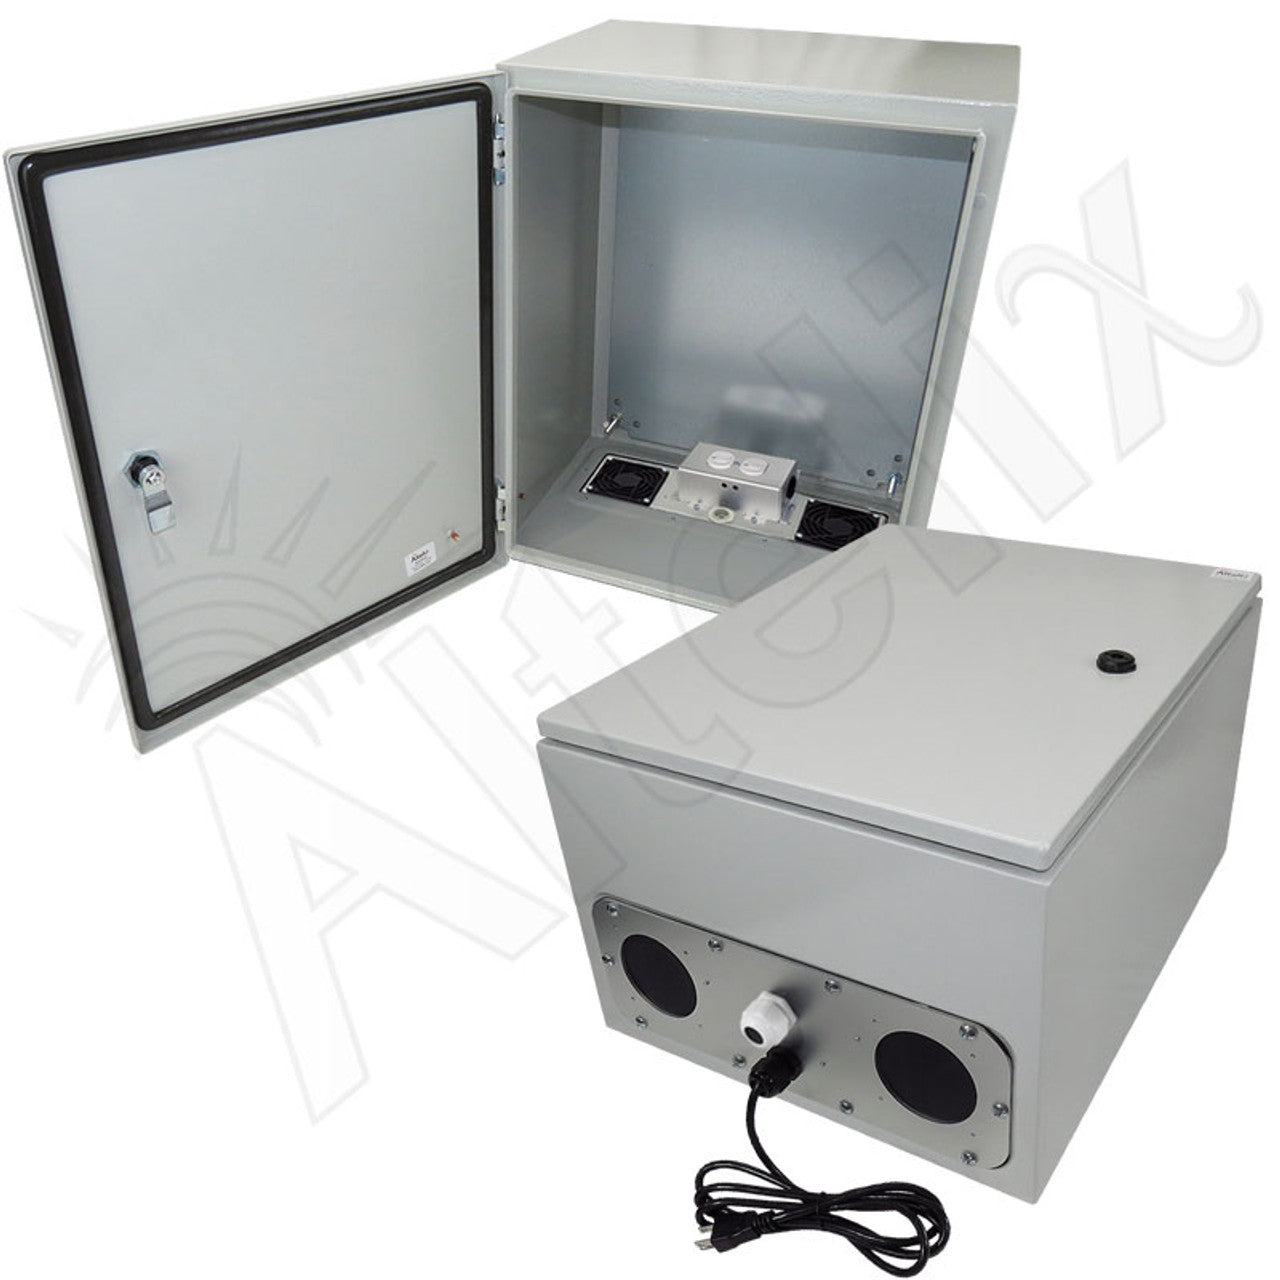 Altelix Steel Weatherproof NEMA Enclosure with Dual 120 VAC Duplex Outlets and Power Cord-4